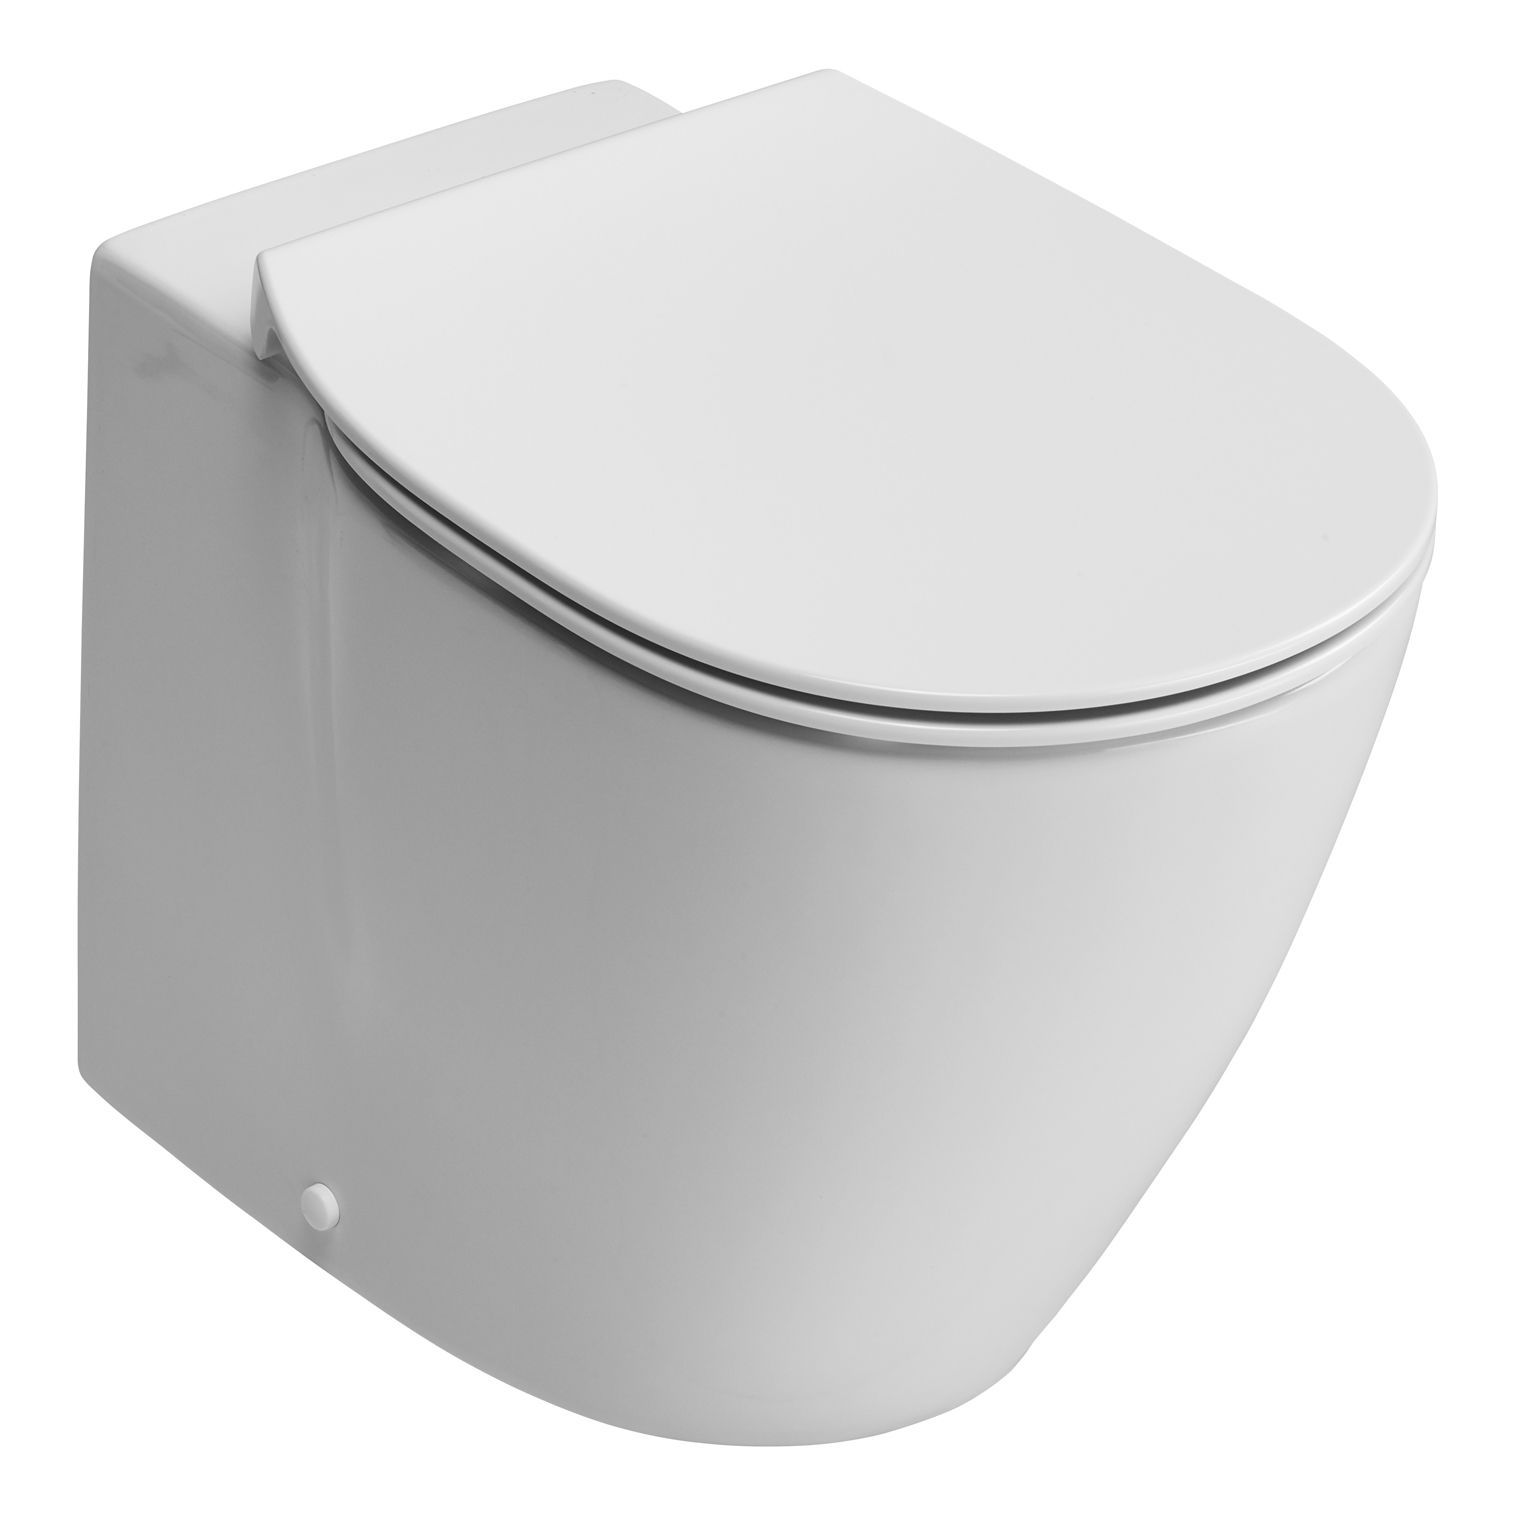 Ideal Standard Imagine aquablade Contemporary Back to wall Toilet with Soft close Seat